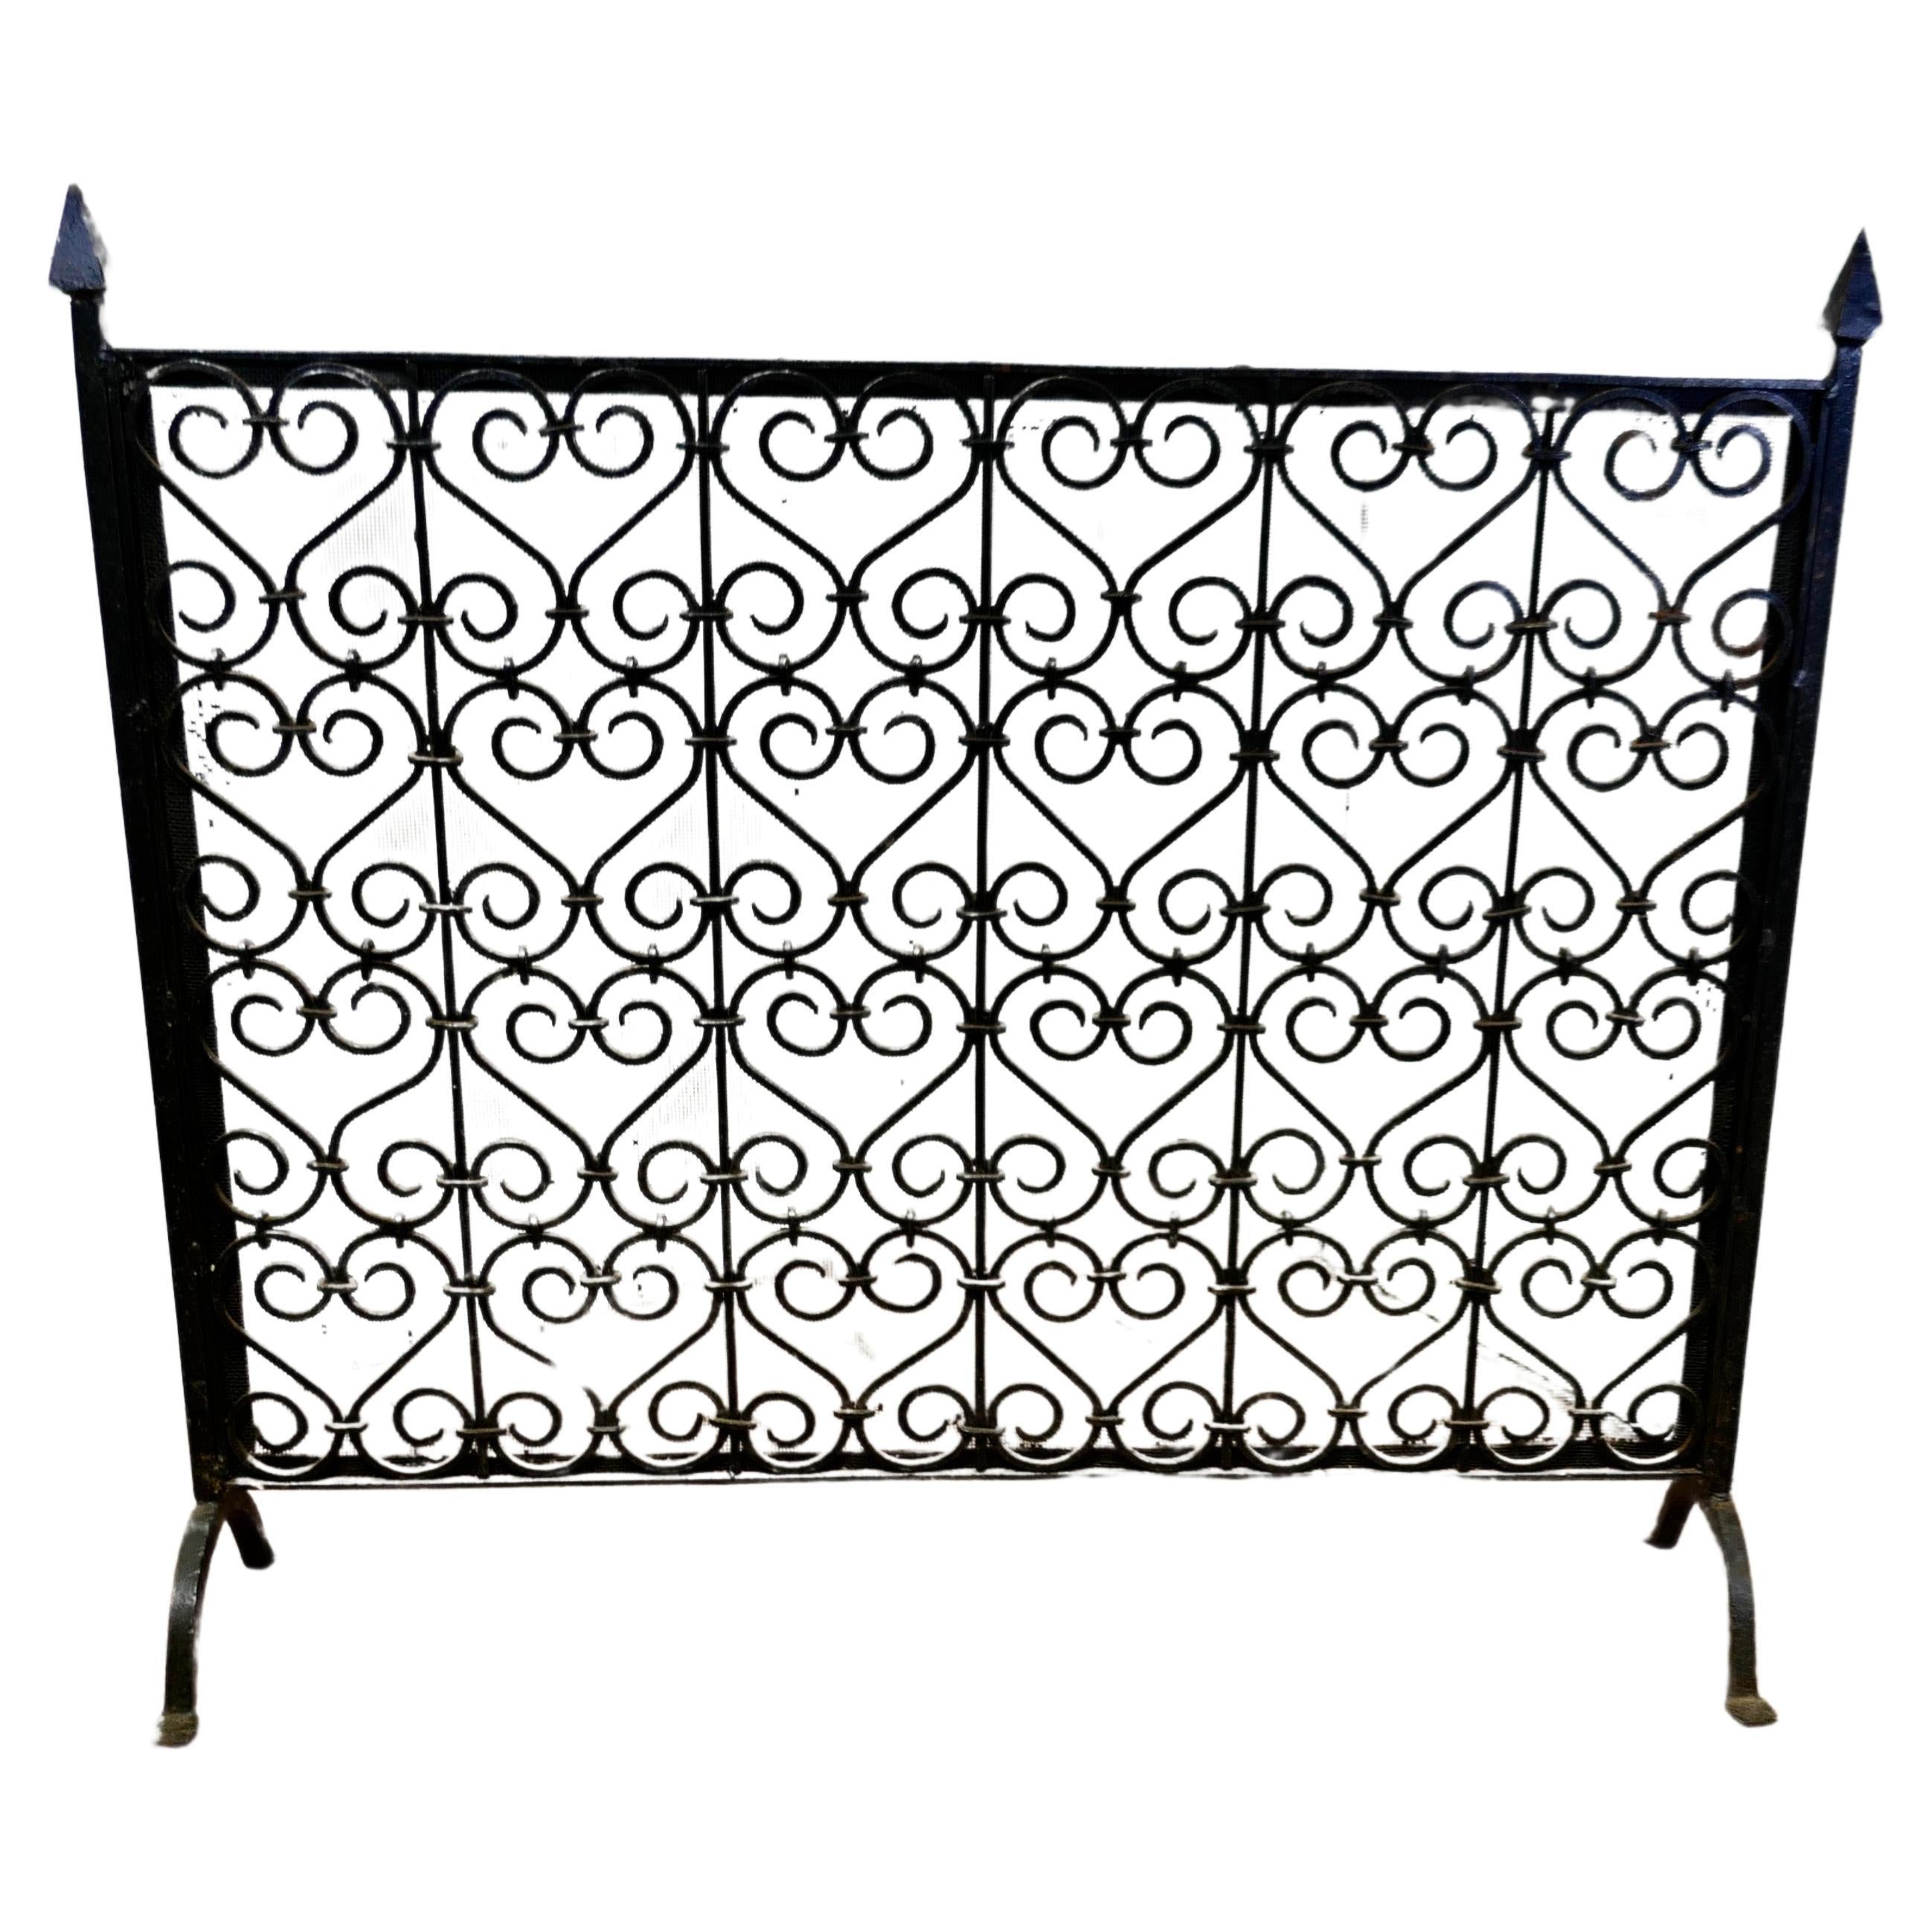 Large Very Heavy Old Gothic Wrought Iron Fire Screen    For Sale